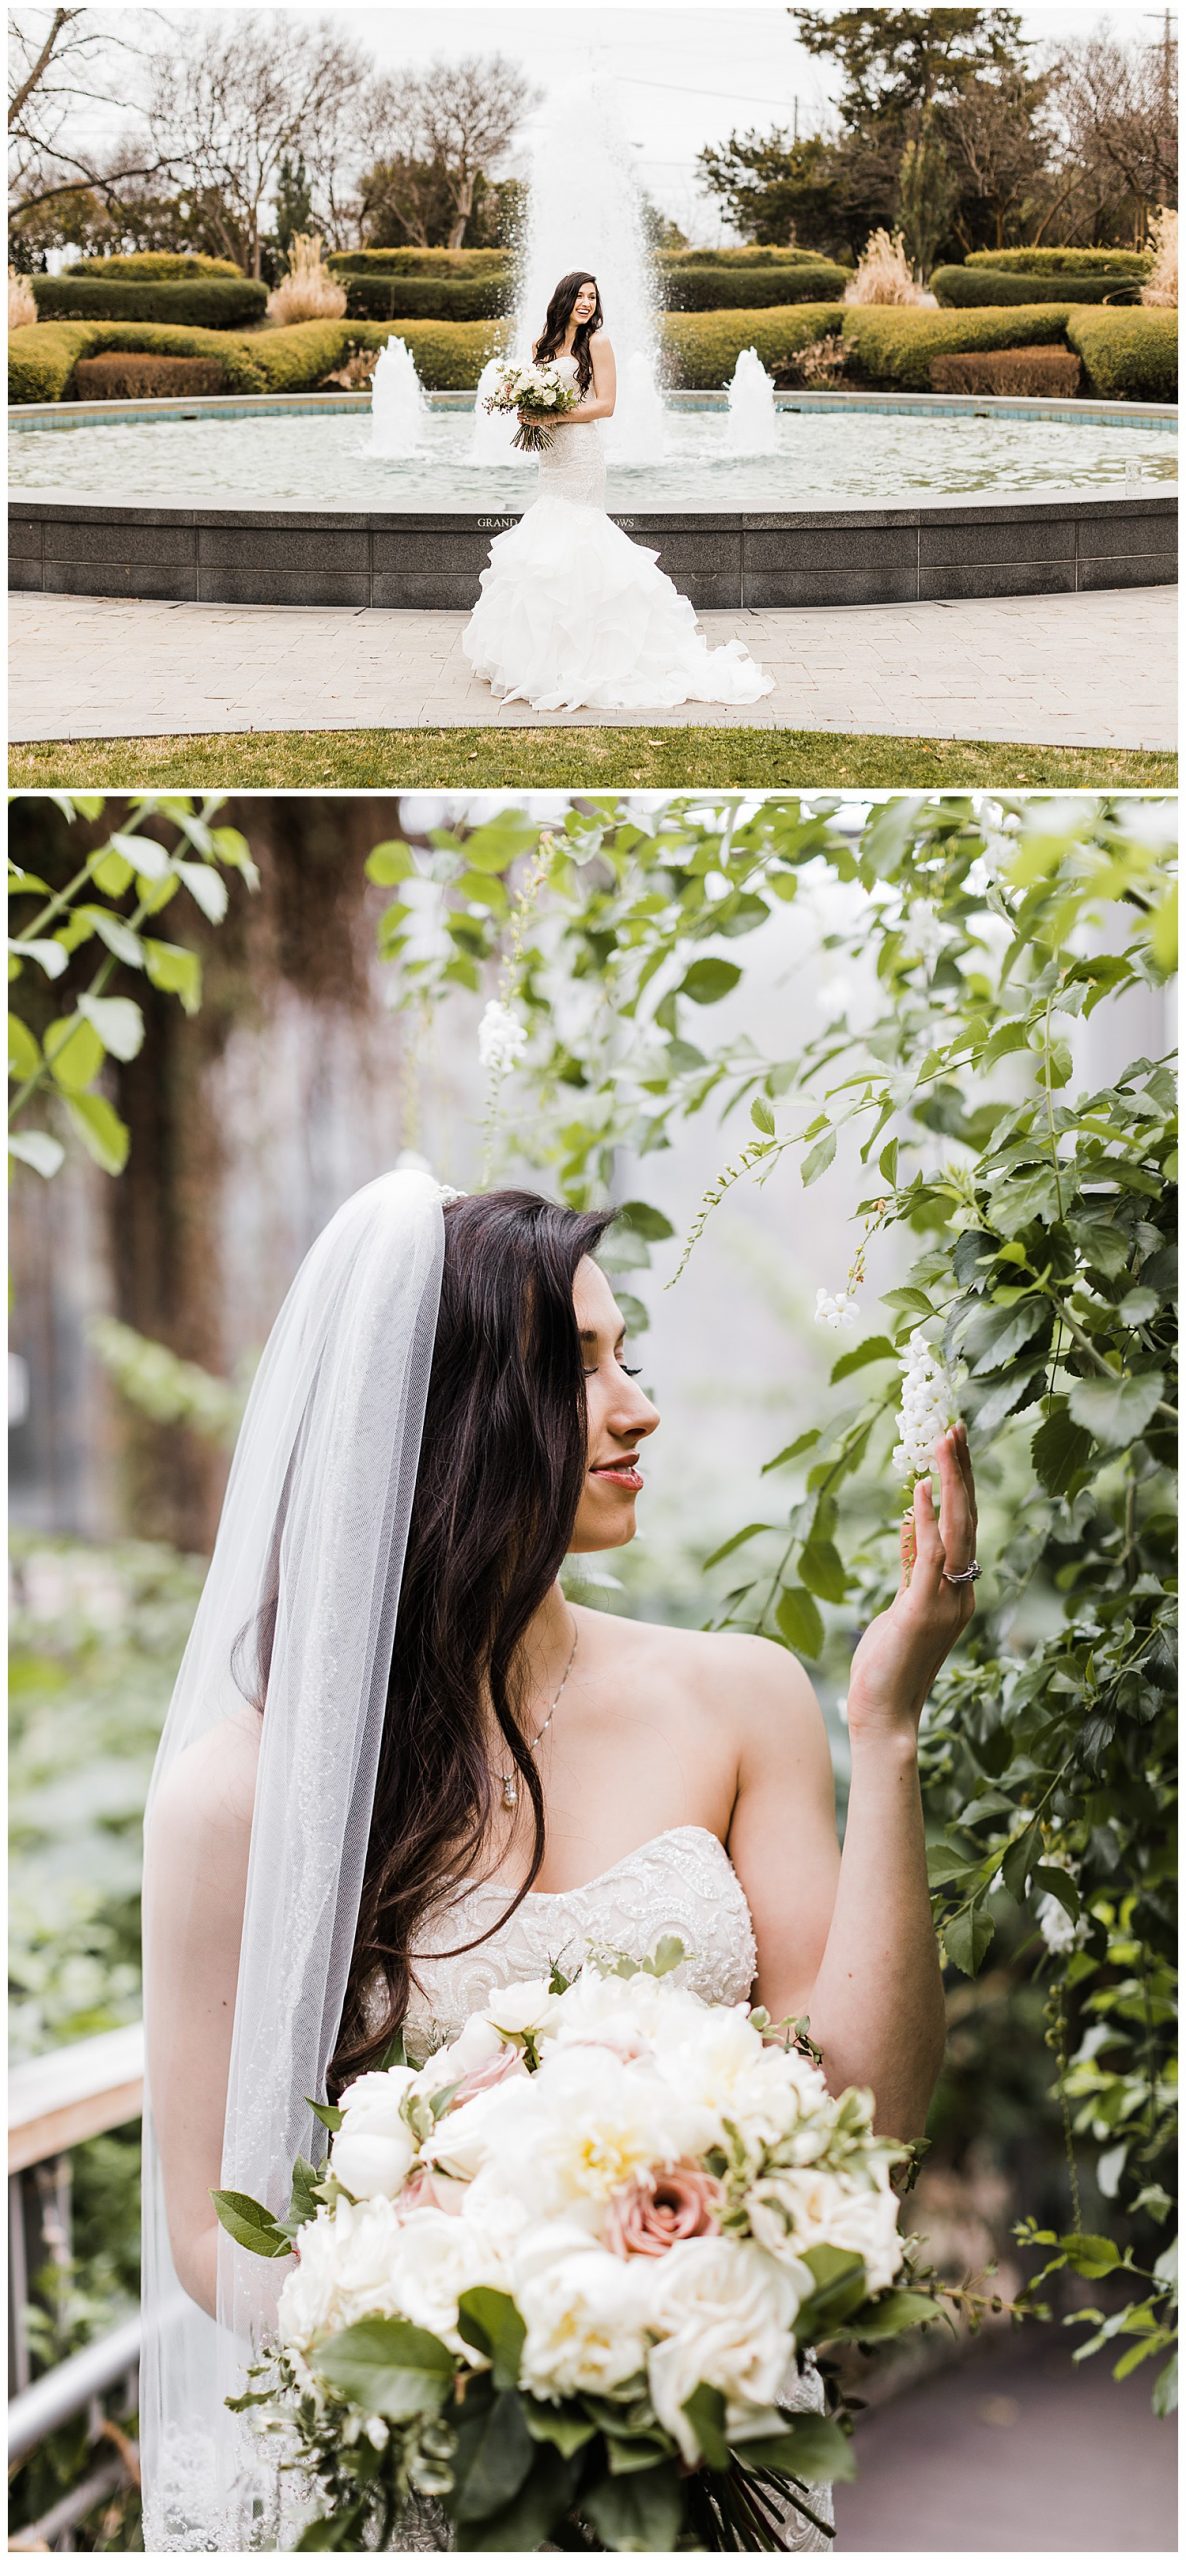 5 tips for your bridal session in Dallas